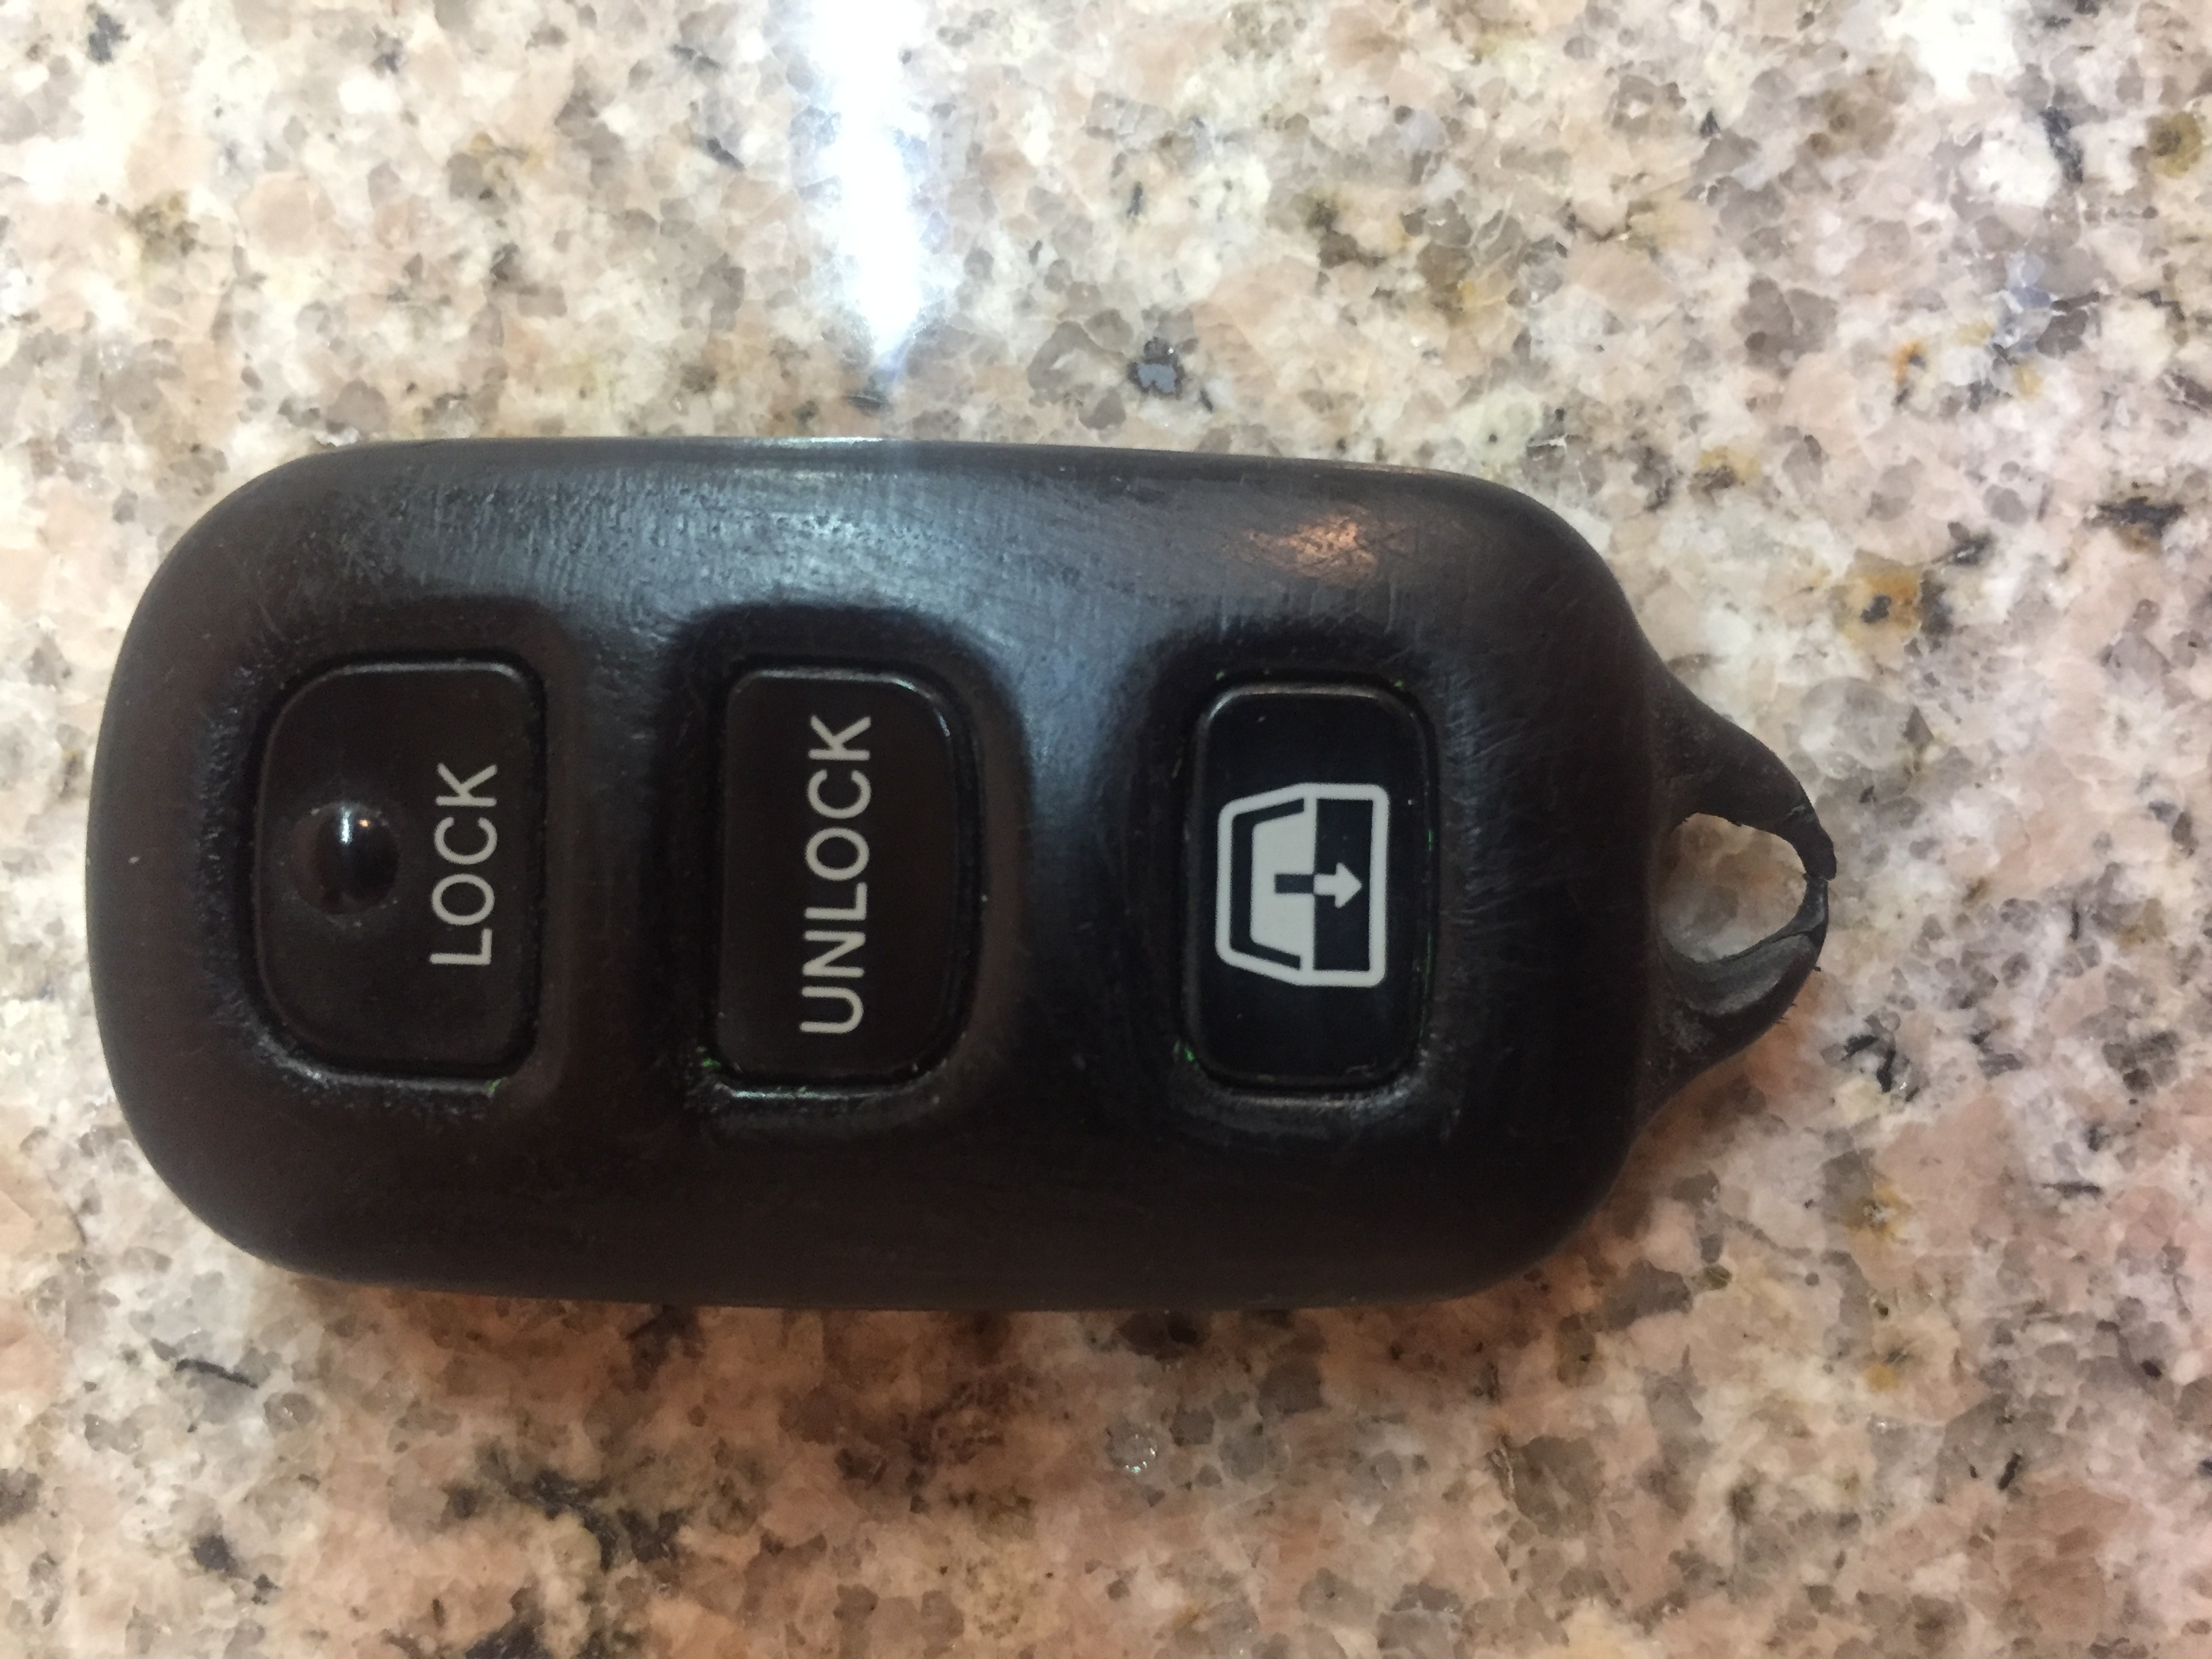 Toyota Sequoia key fob fix by sparky6548 Download free STL model